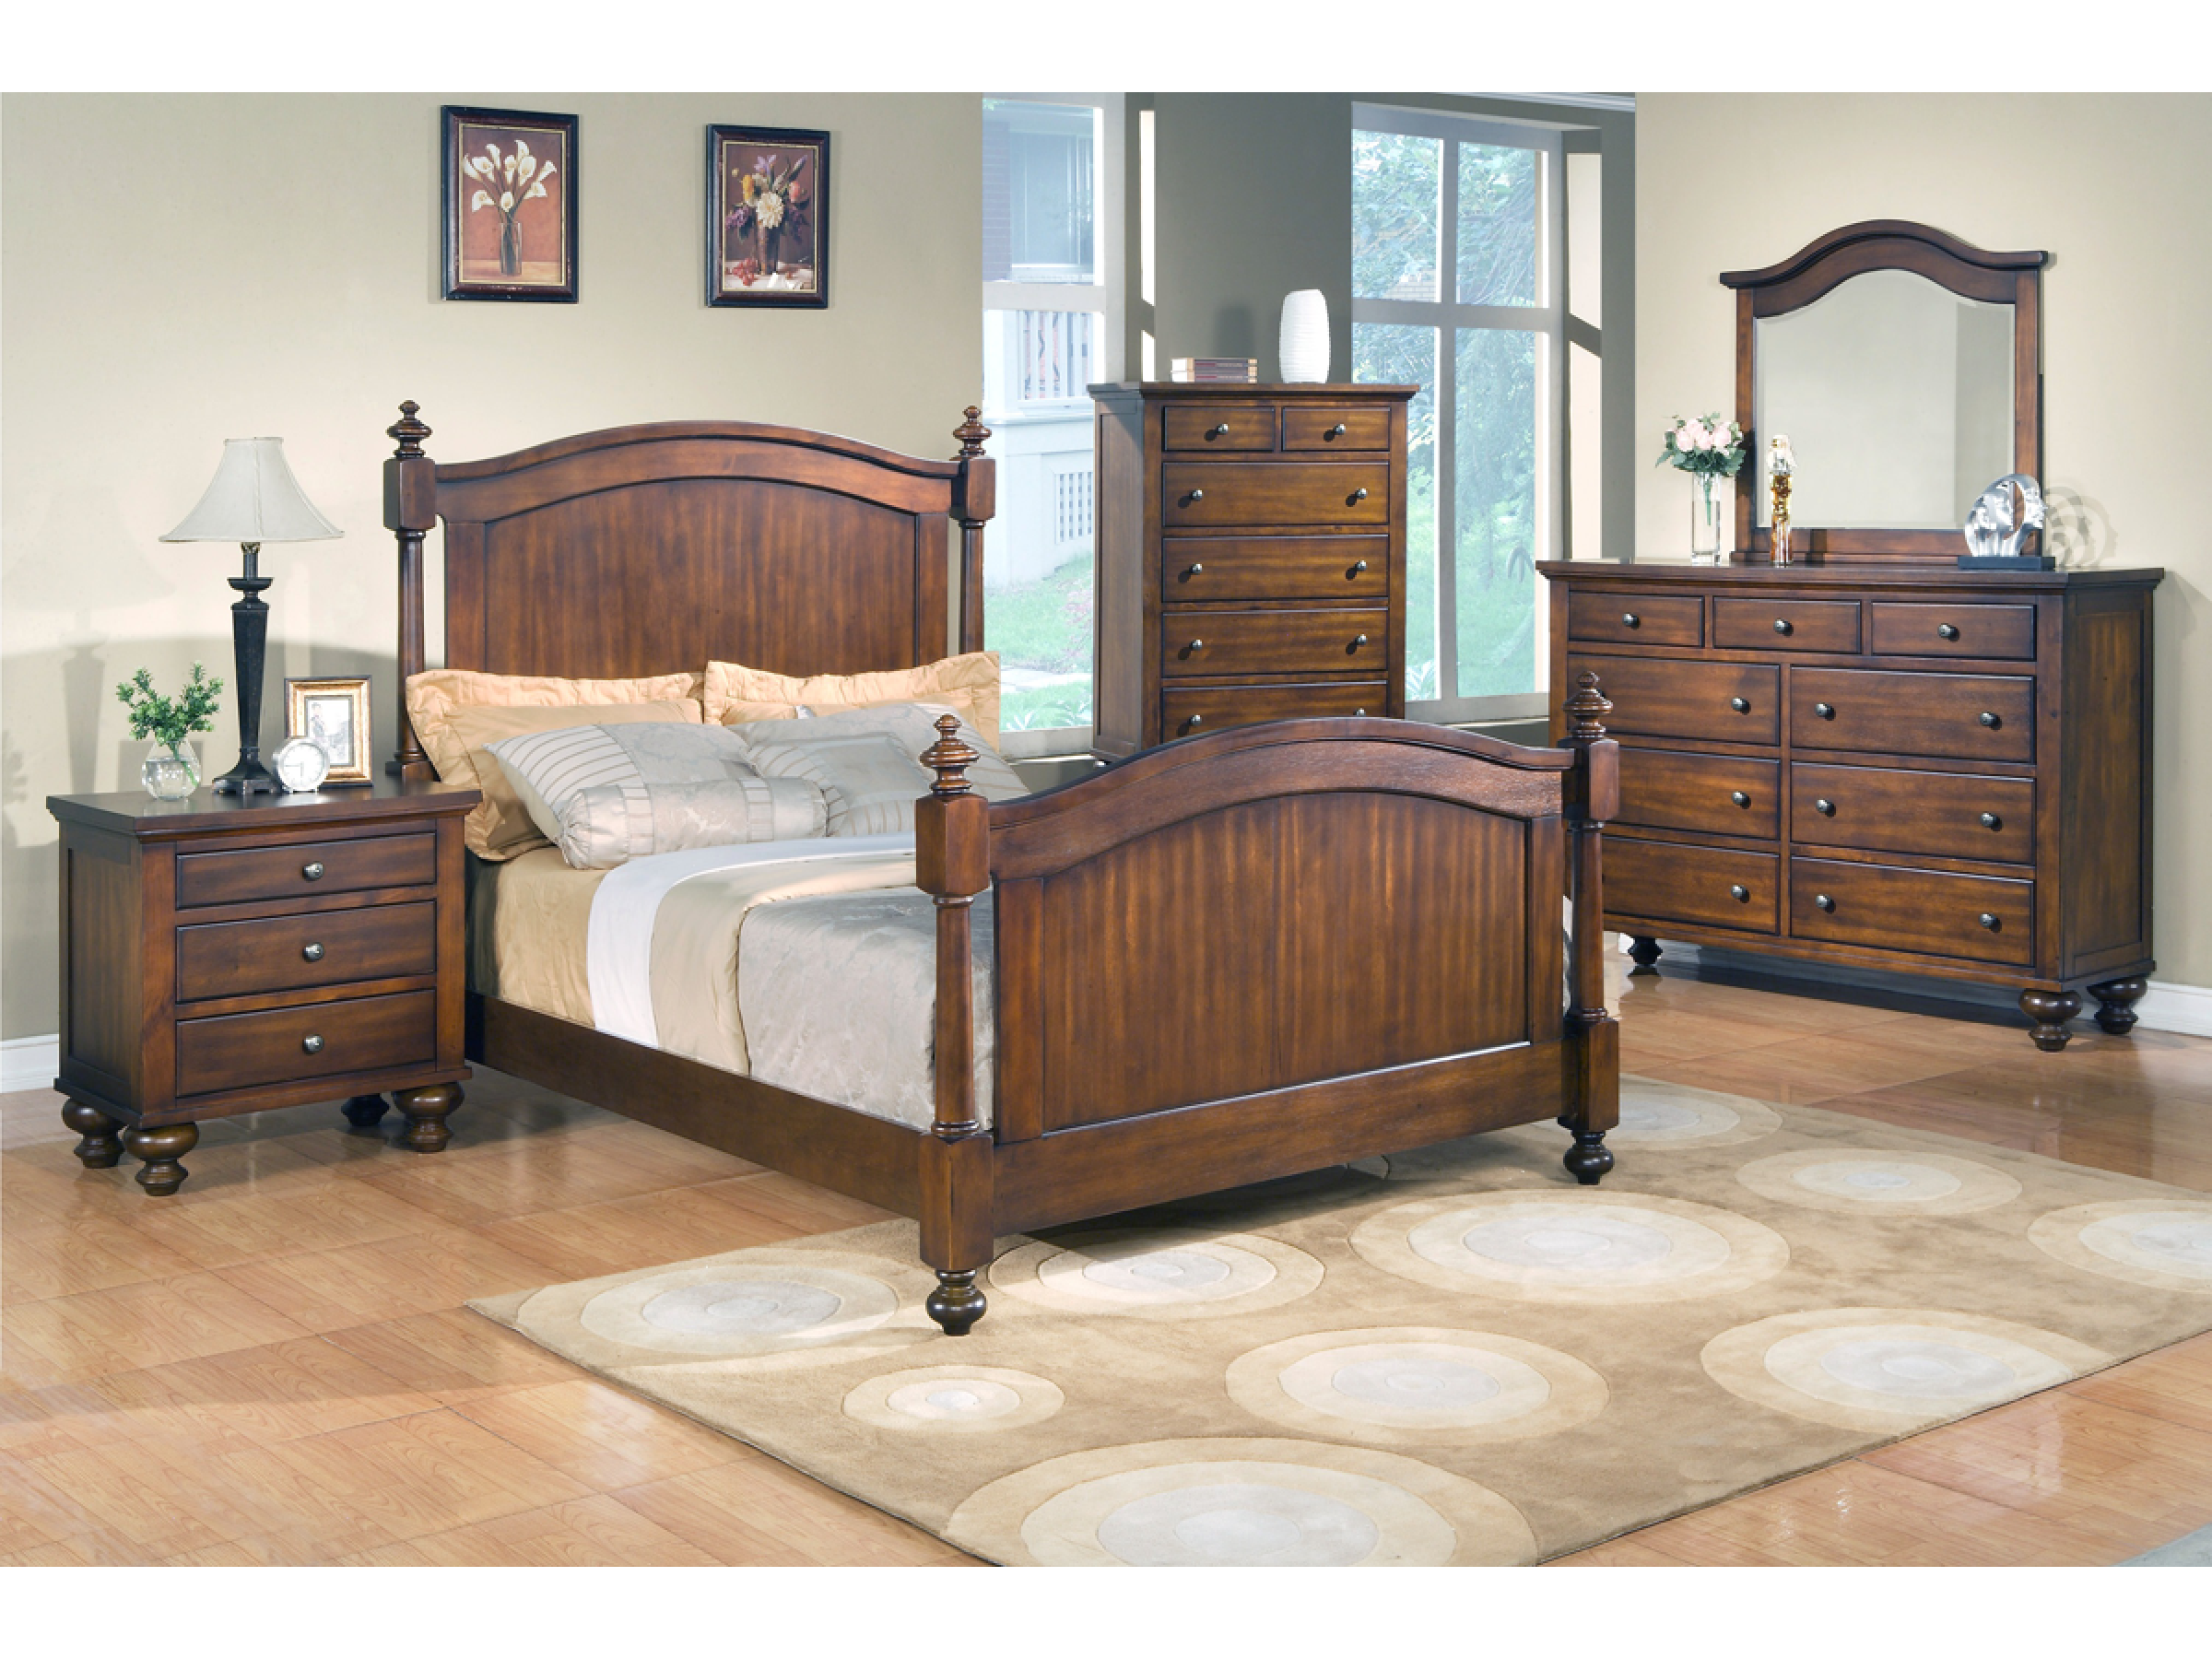 isabella bedroom furniture collection